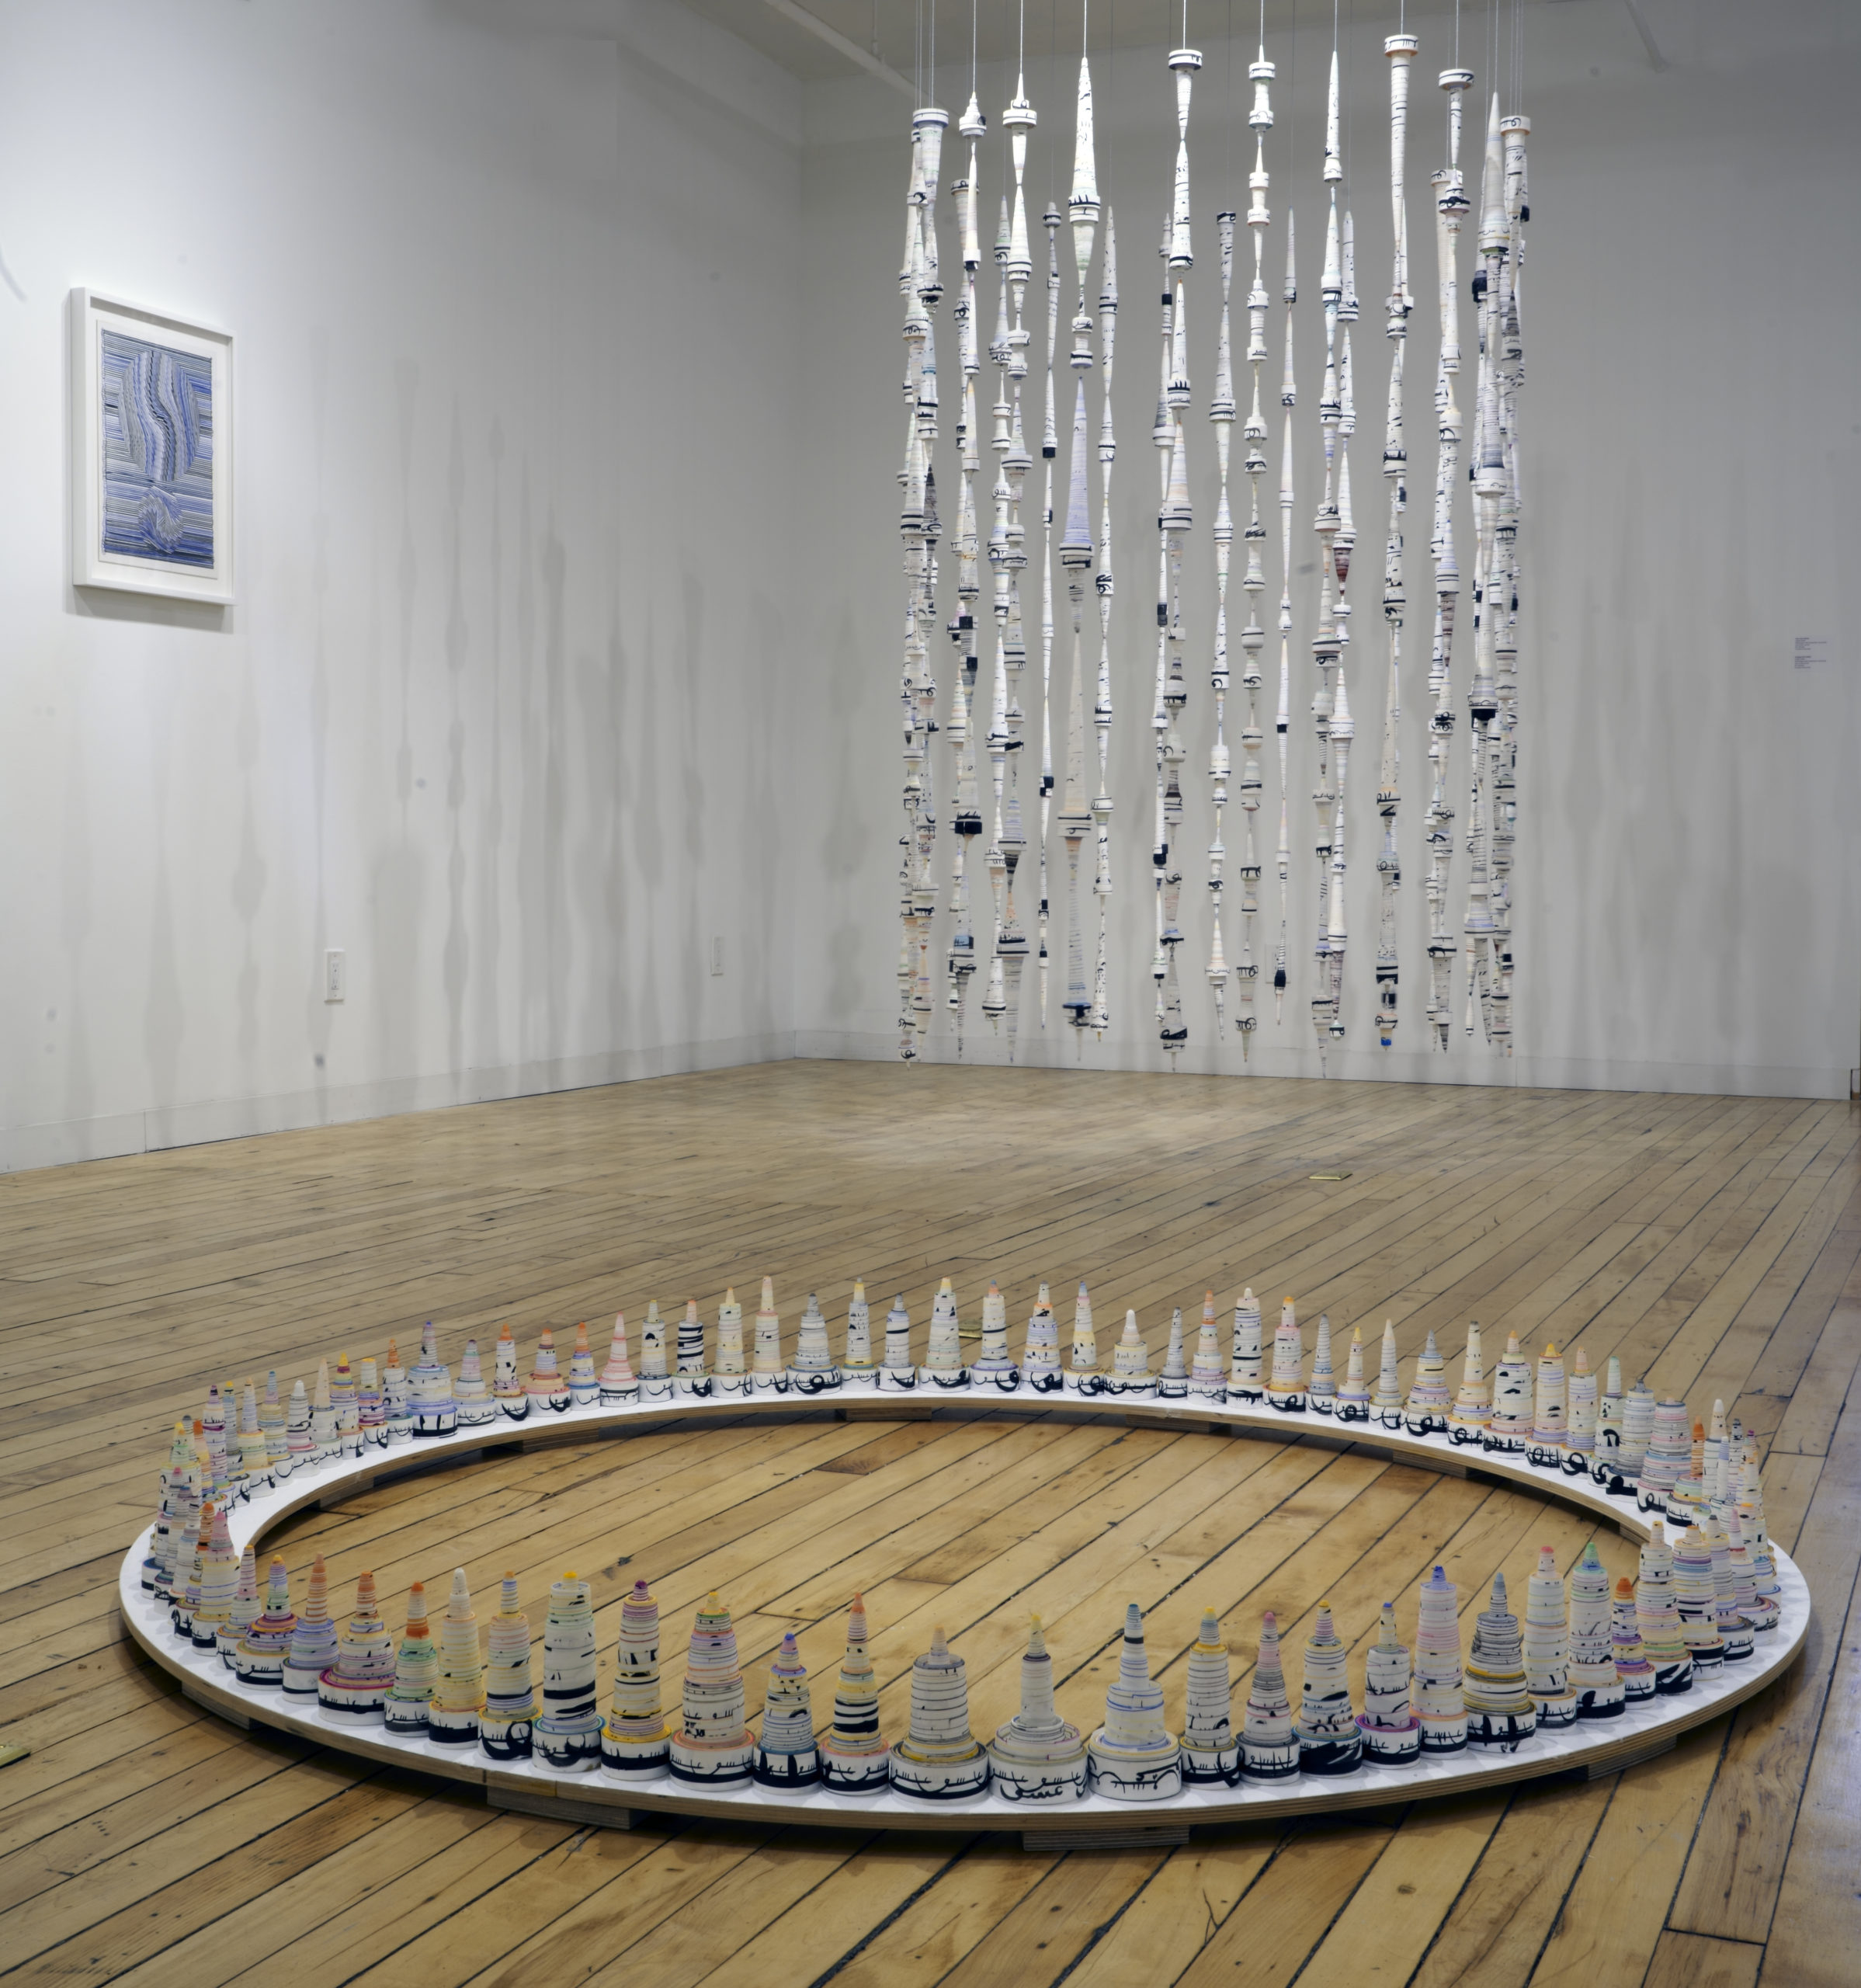 Installation view of circular artwork on the floor and hanging artwork made of paper scrolls. By Hadieh Safie 2020.